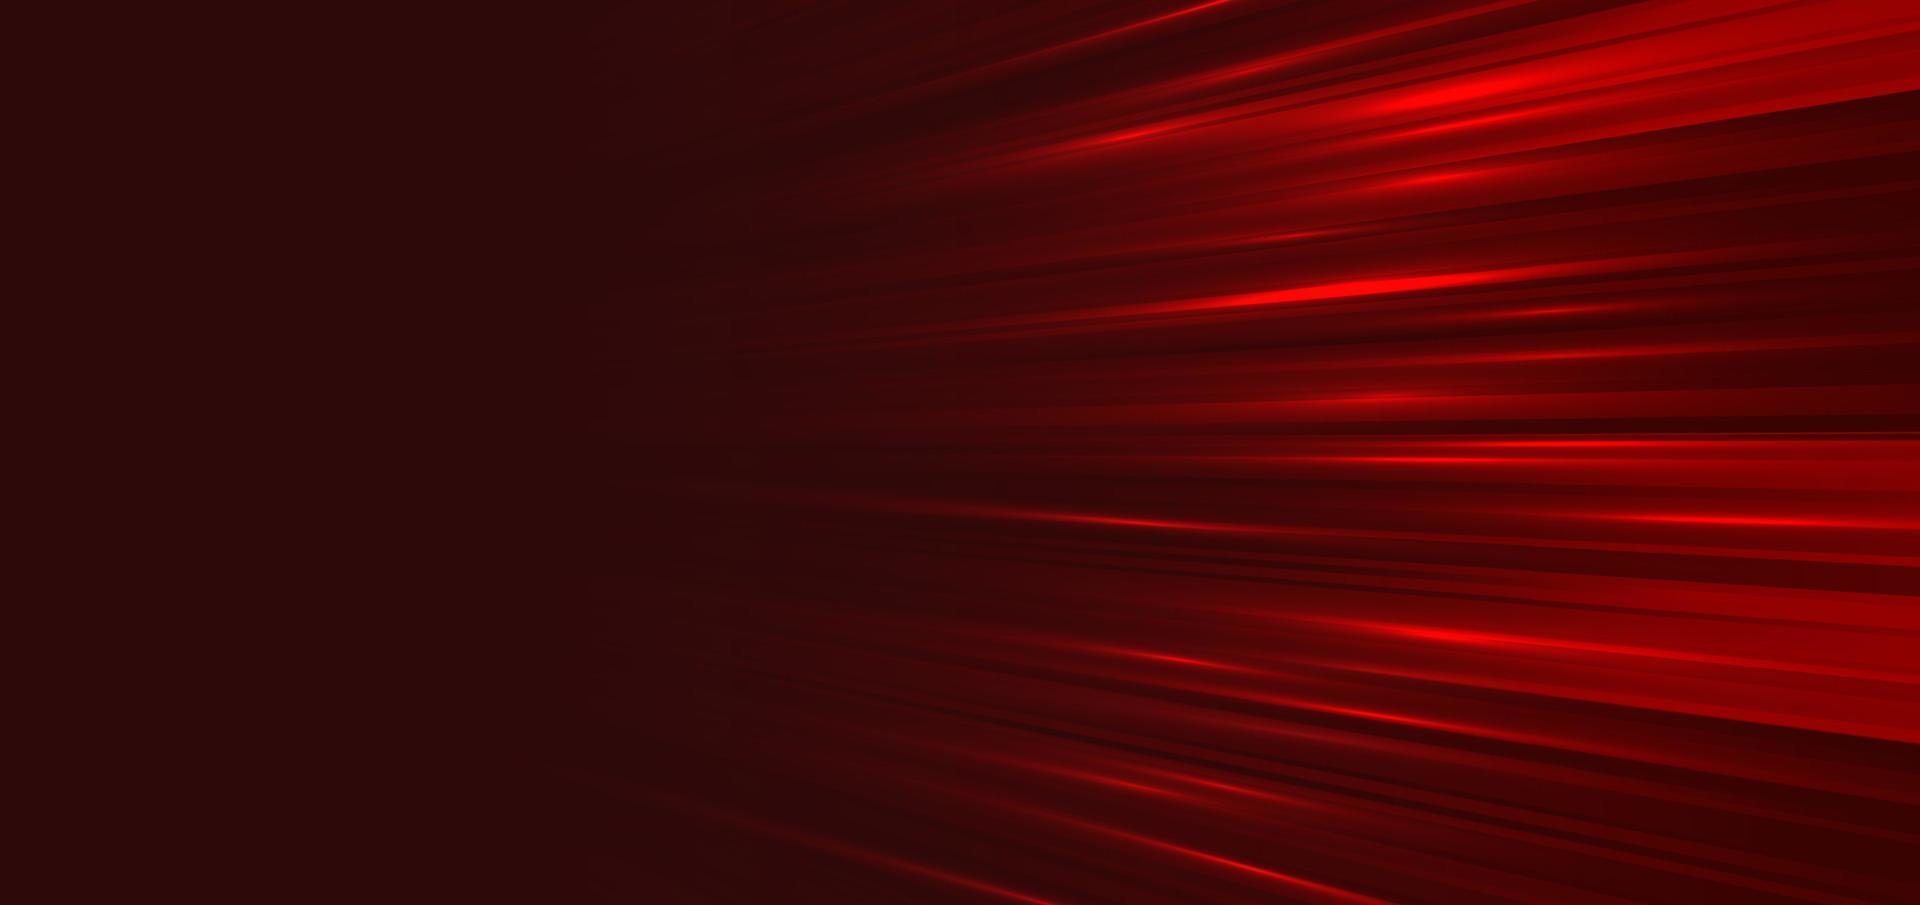 Abstract background diagonal speed motion light red stripe lines. You can use for ad, poster, template, business presentation. vector